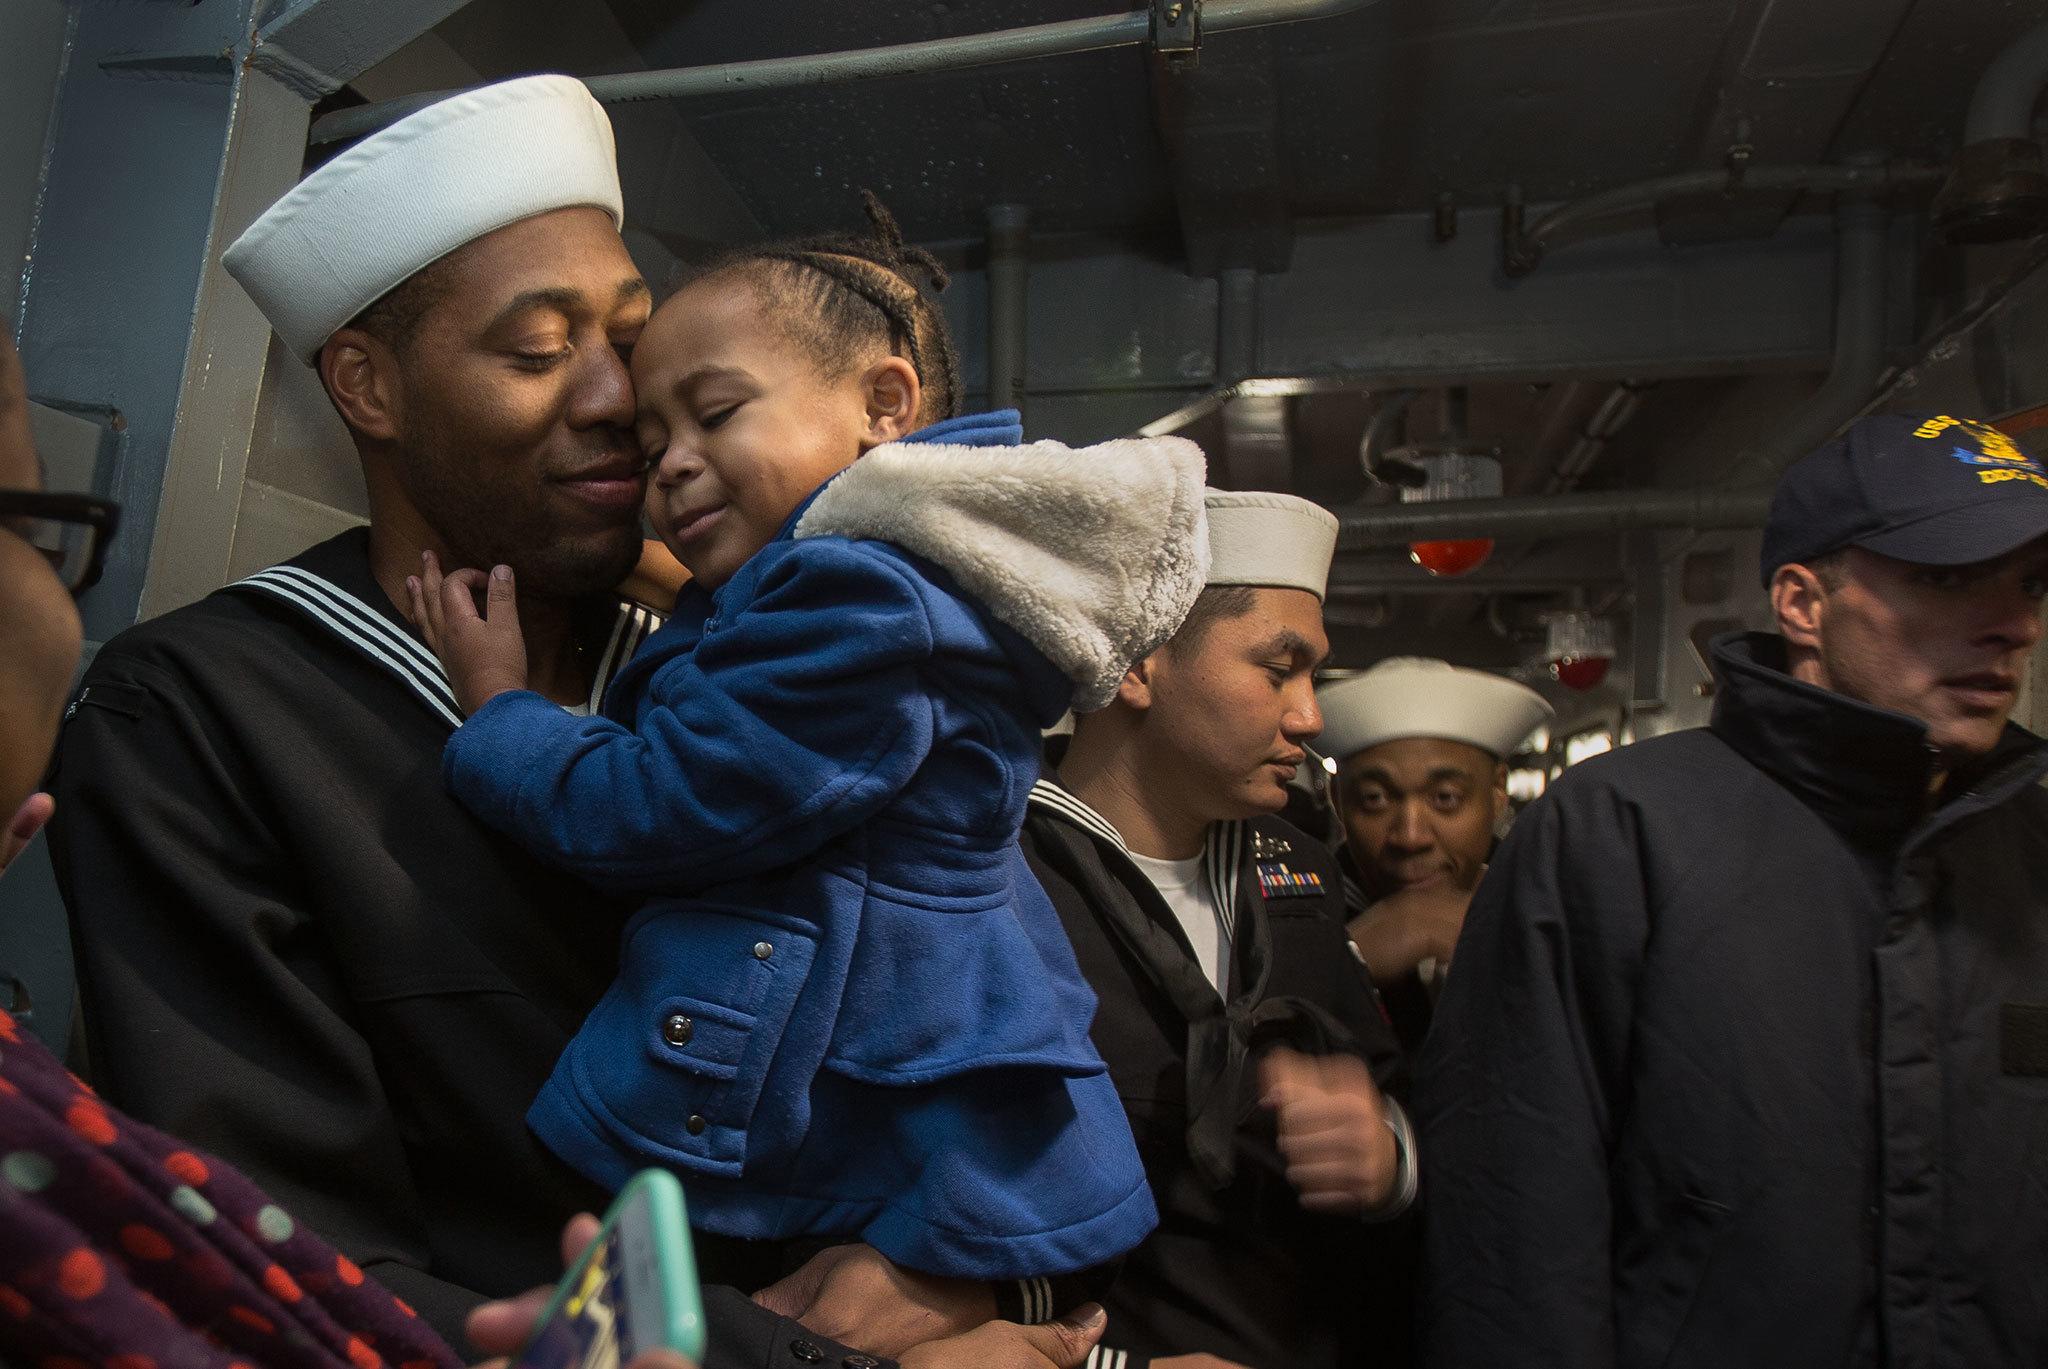 As his fellow crewmates head to the mess hall to meet their families, Seaman Sean Tender and daughter Sydney, 2, hold each other after the USS Kidd docks at Everett Naval Station on Monday. (Andy Bronson / The Herald)